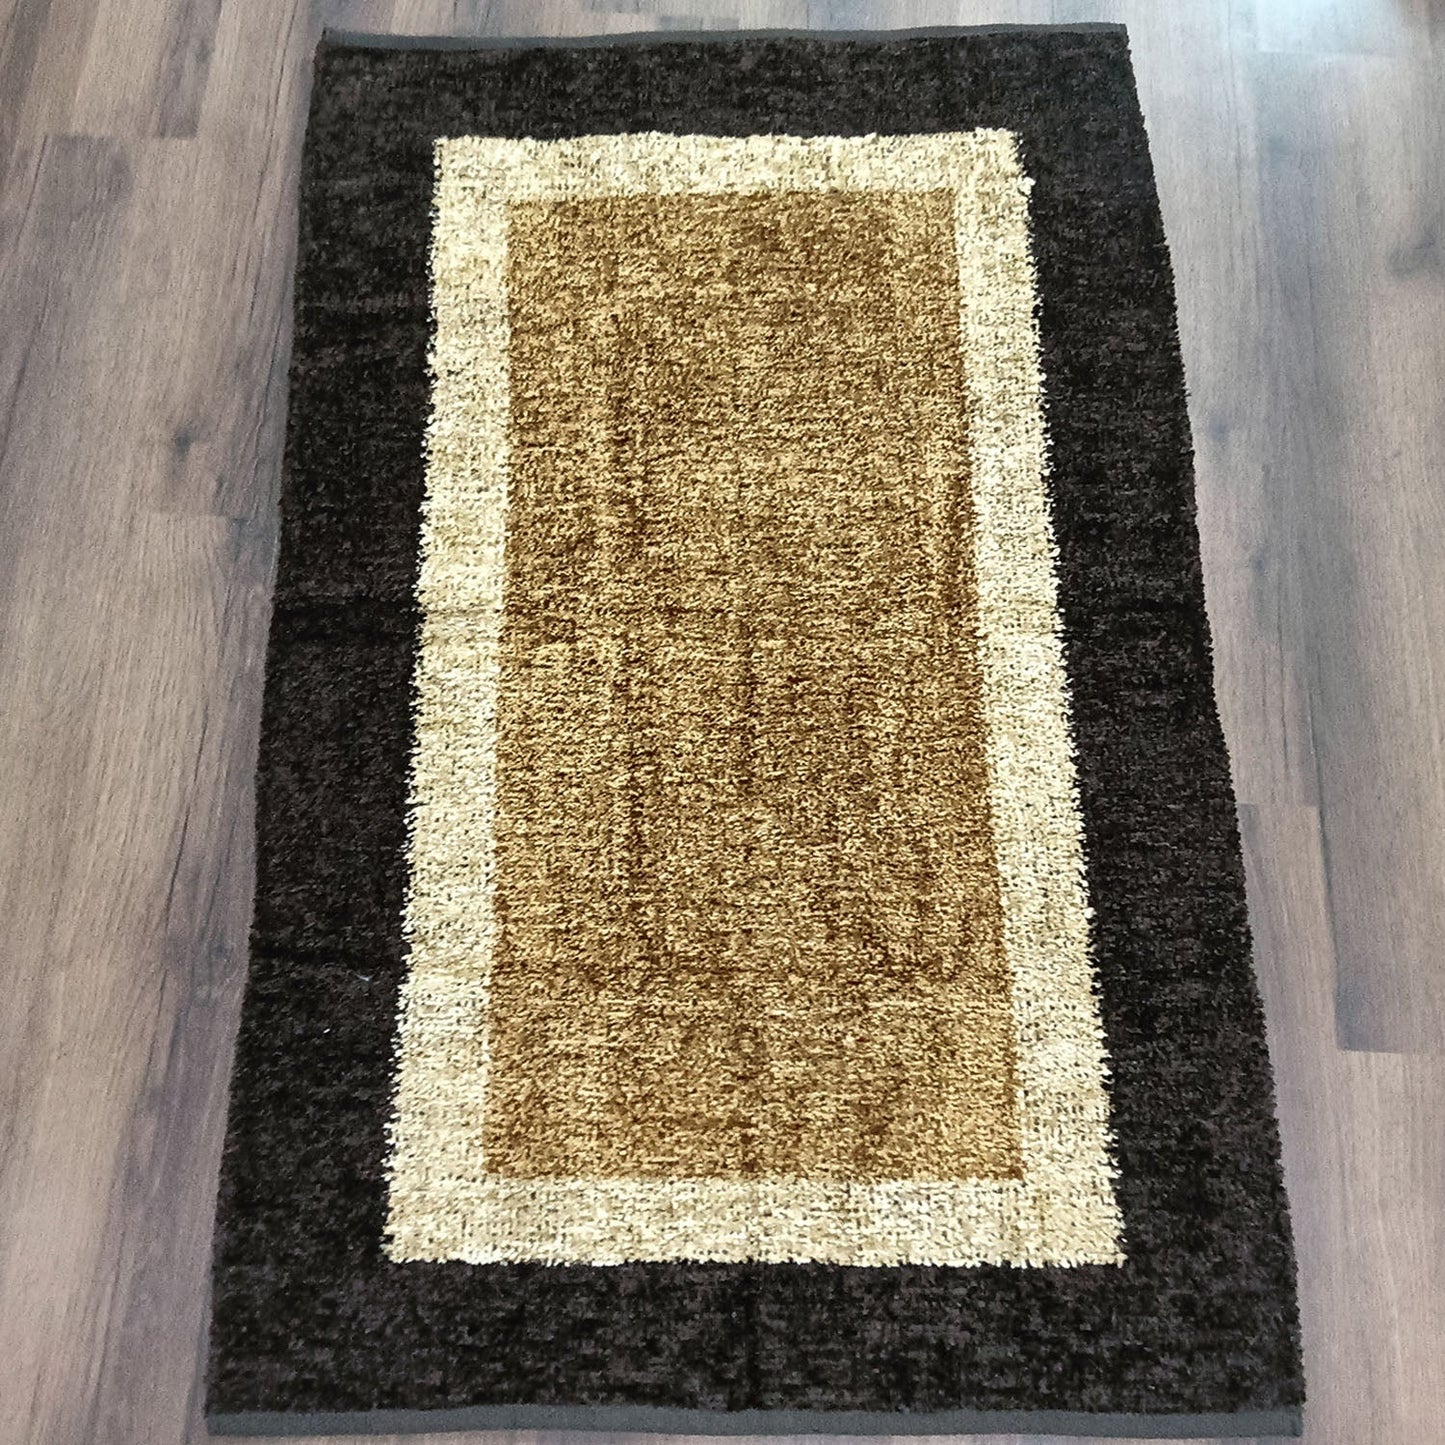 Avioni Handloom Cut Shuttle Rugs by Master Artisans | Feathers like Luxurious Silk Soft Touch  | Home Washable | Double Border in Coffee And Beige | For Living Room Made Reversible - 3 feet x 5 feet (~90 cm x 150 cm)